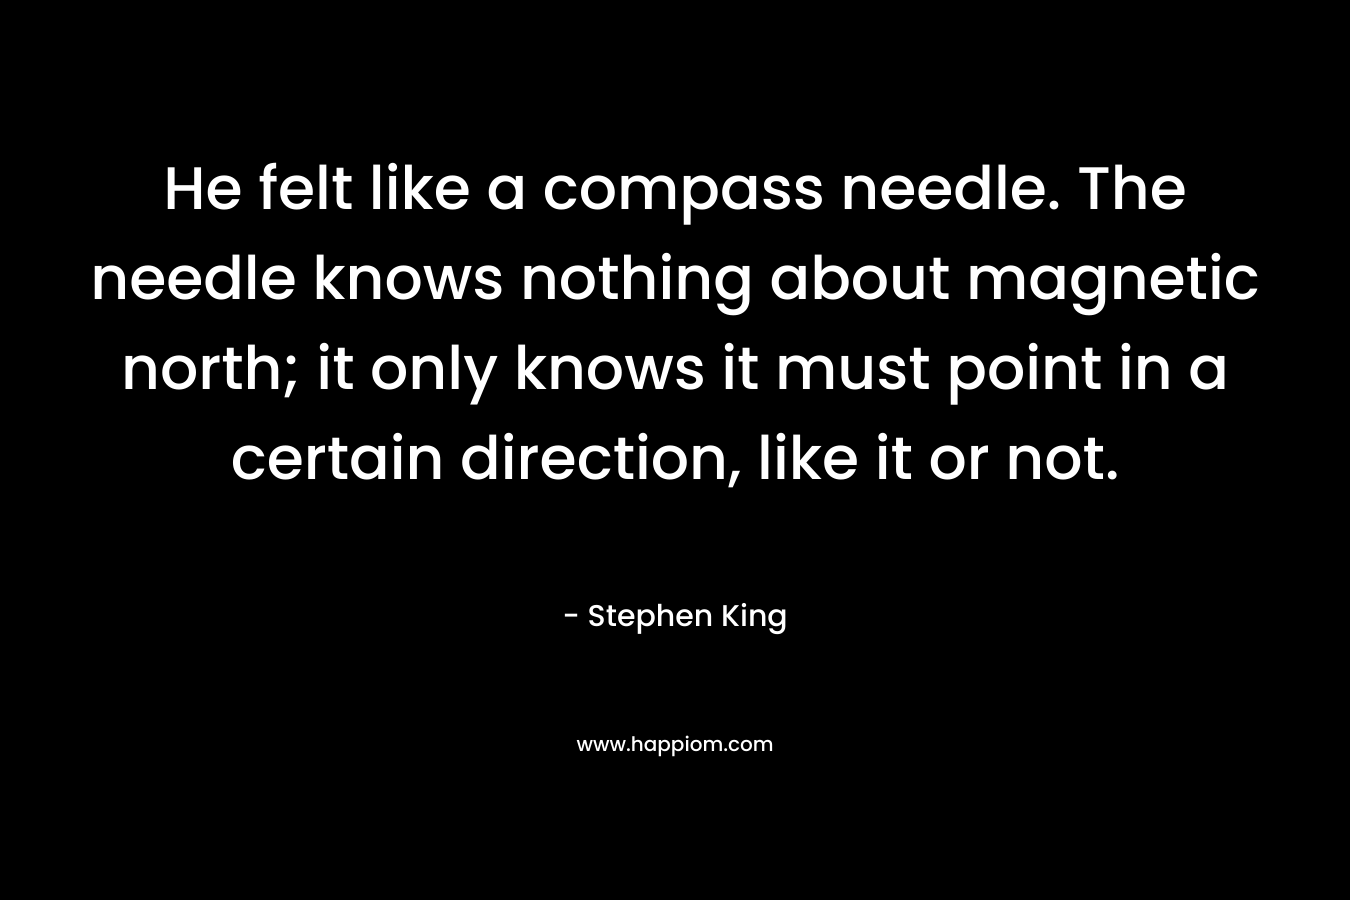 He felt like a compass needle. The needle knows nothing about magnetic north; it only knows it must point in a certain direction, like it or not.